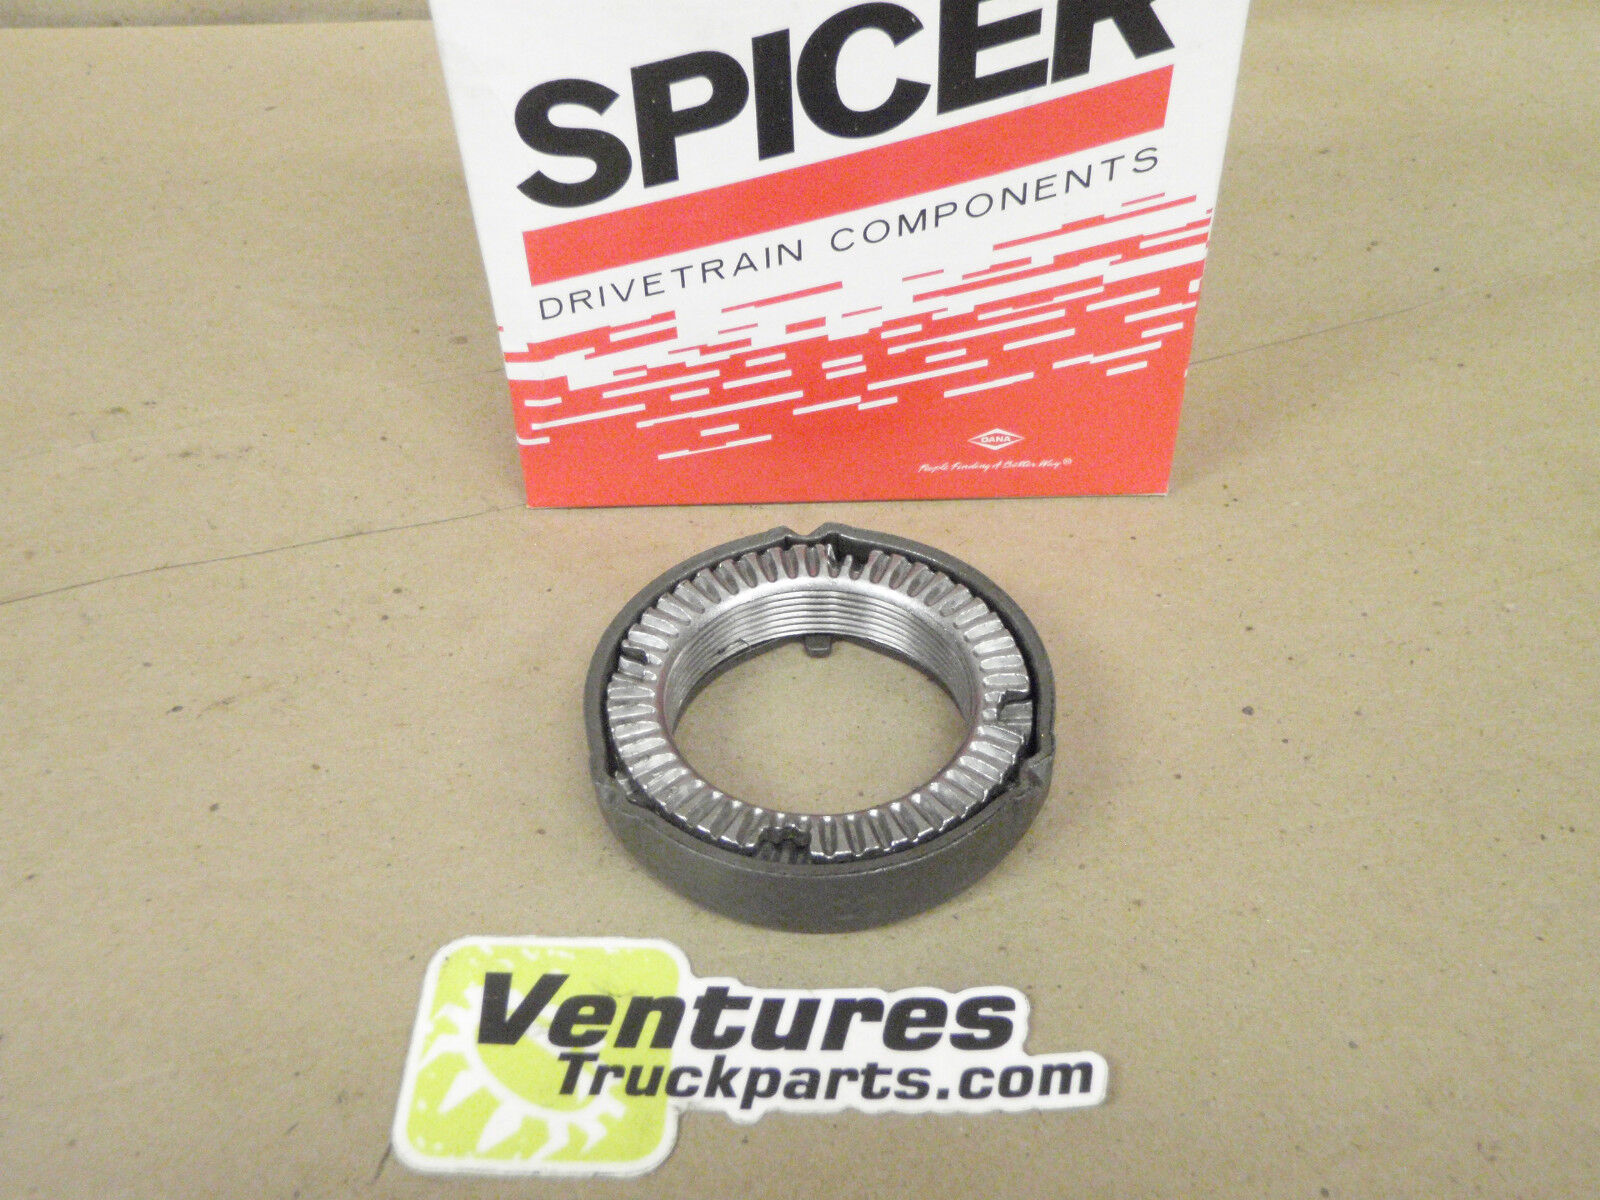 CHEVY GMC KING PIN DANA 60 SPINDLE NUT CONVERSION KIT UPGRADE FROM